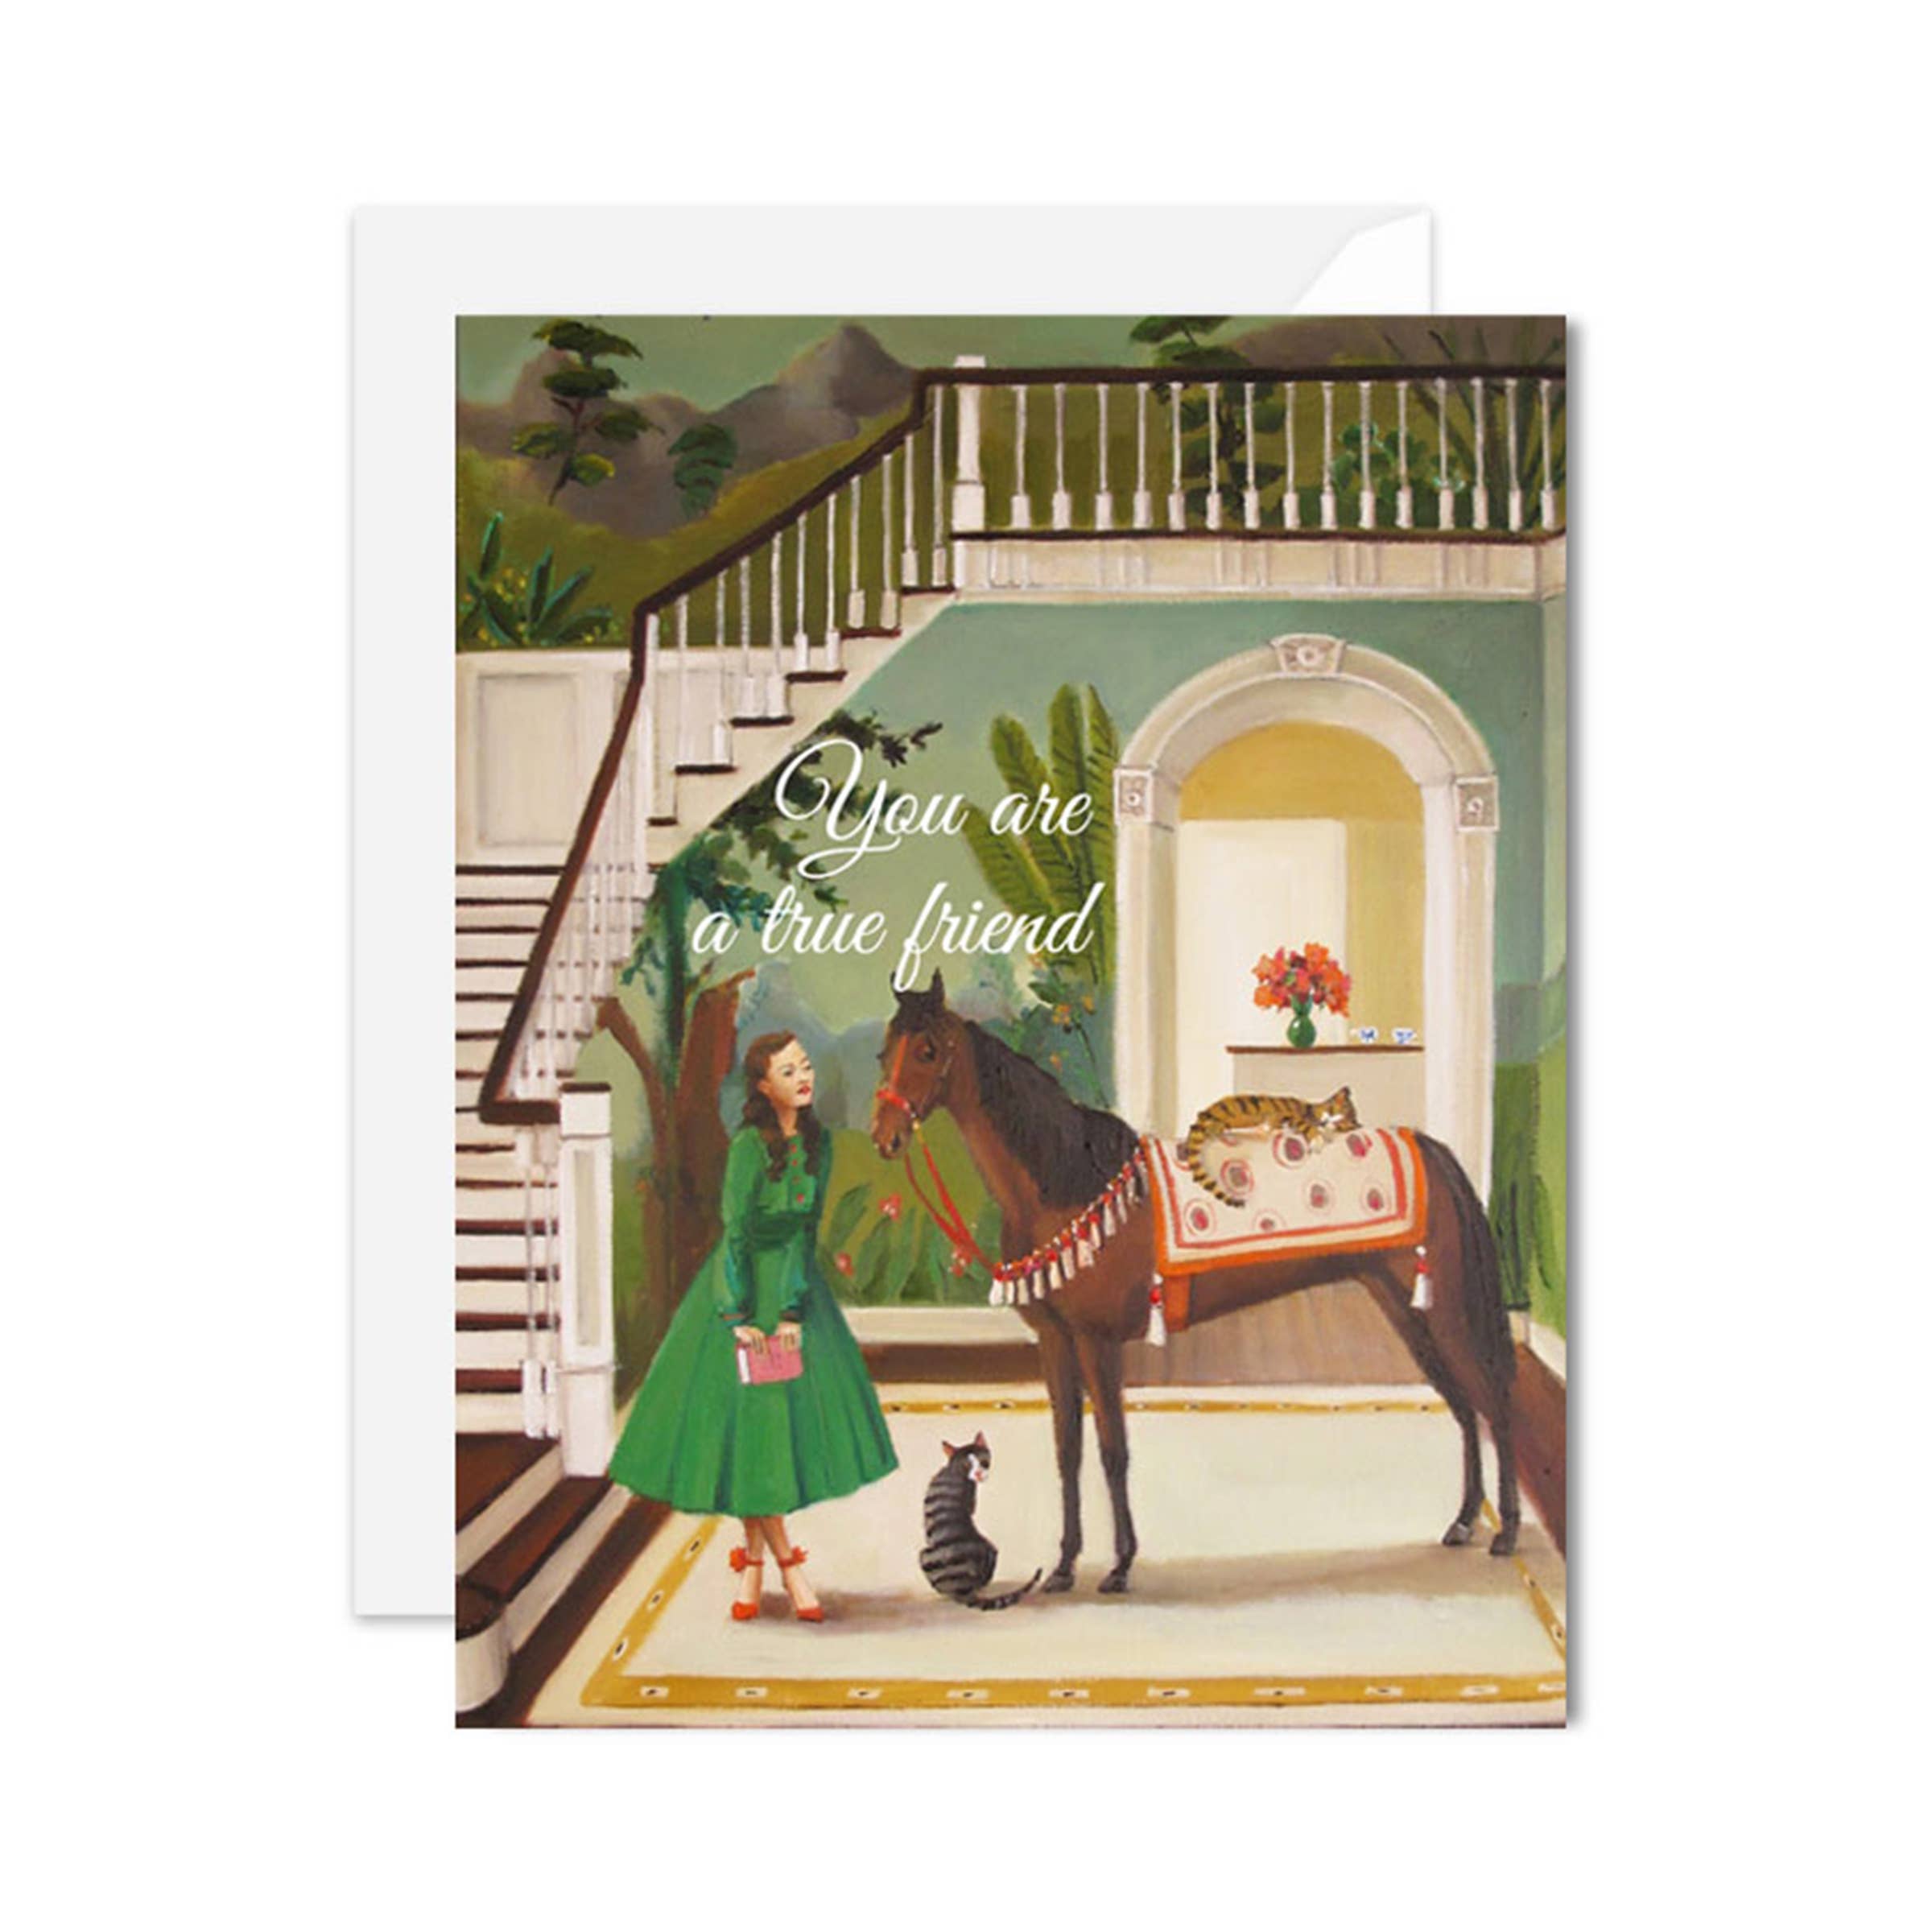 Colourful square greeting card. Horse and girl with 2 cats. Text says "You are a true Freind"